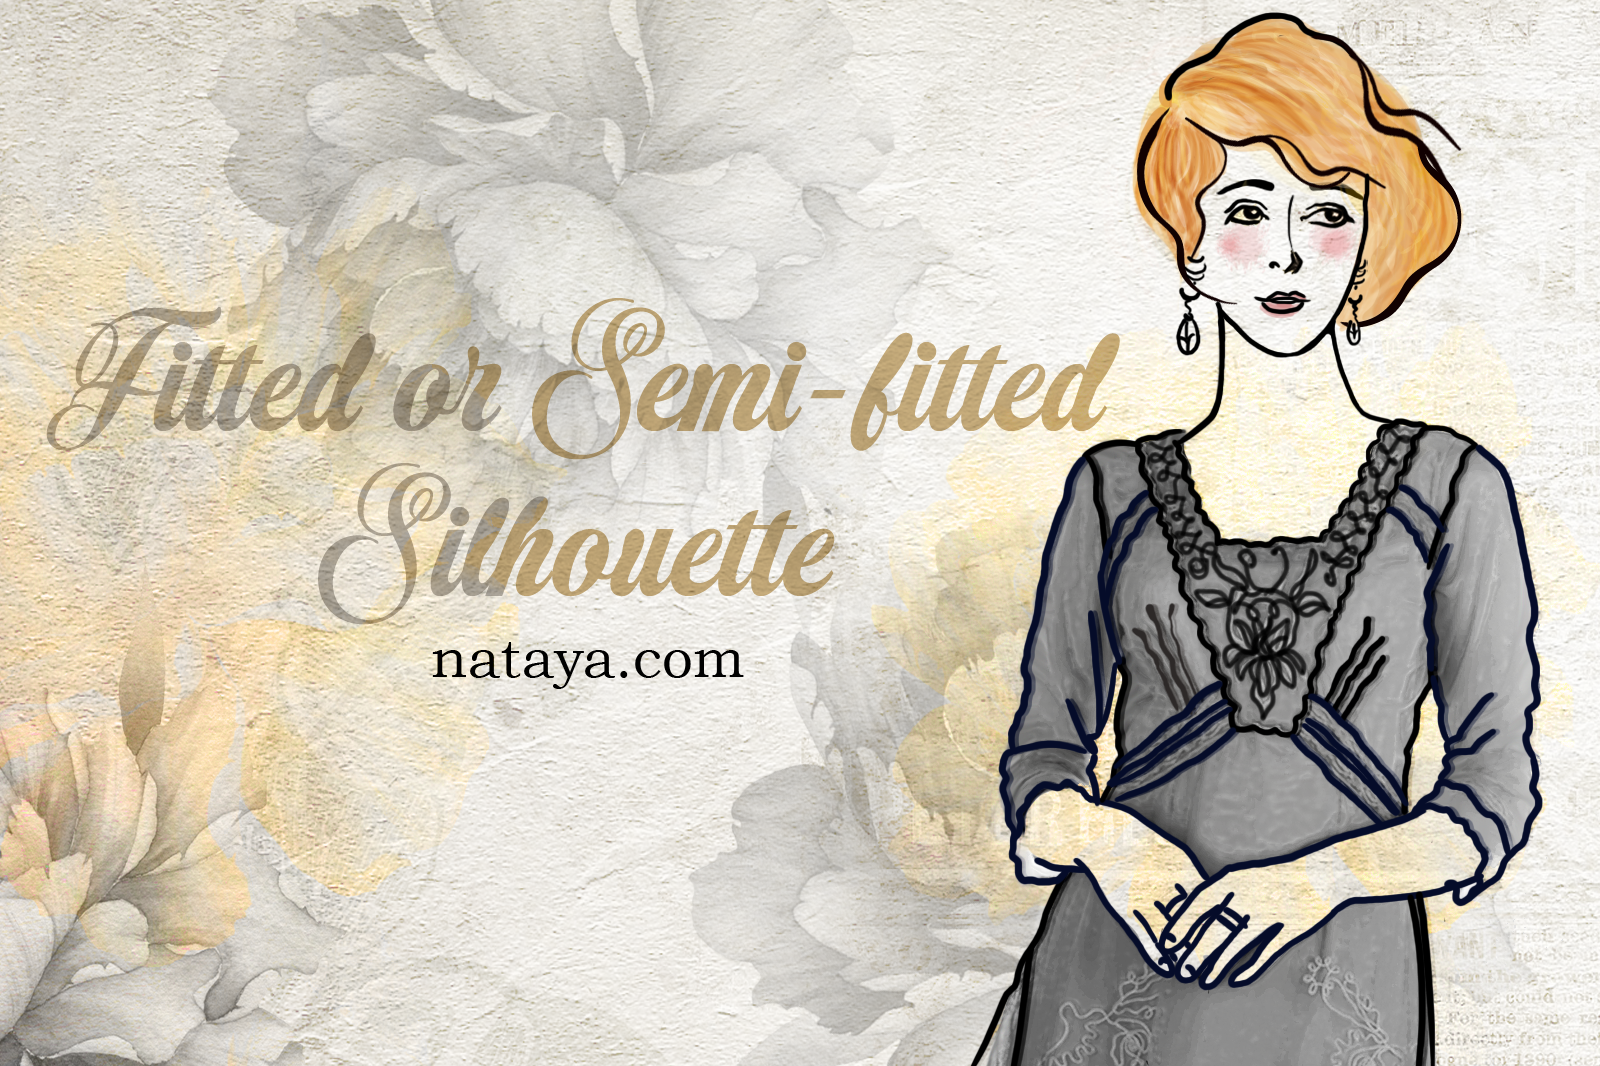 Fitted or Semi fitted silhouette - Nataya Fashion Blog